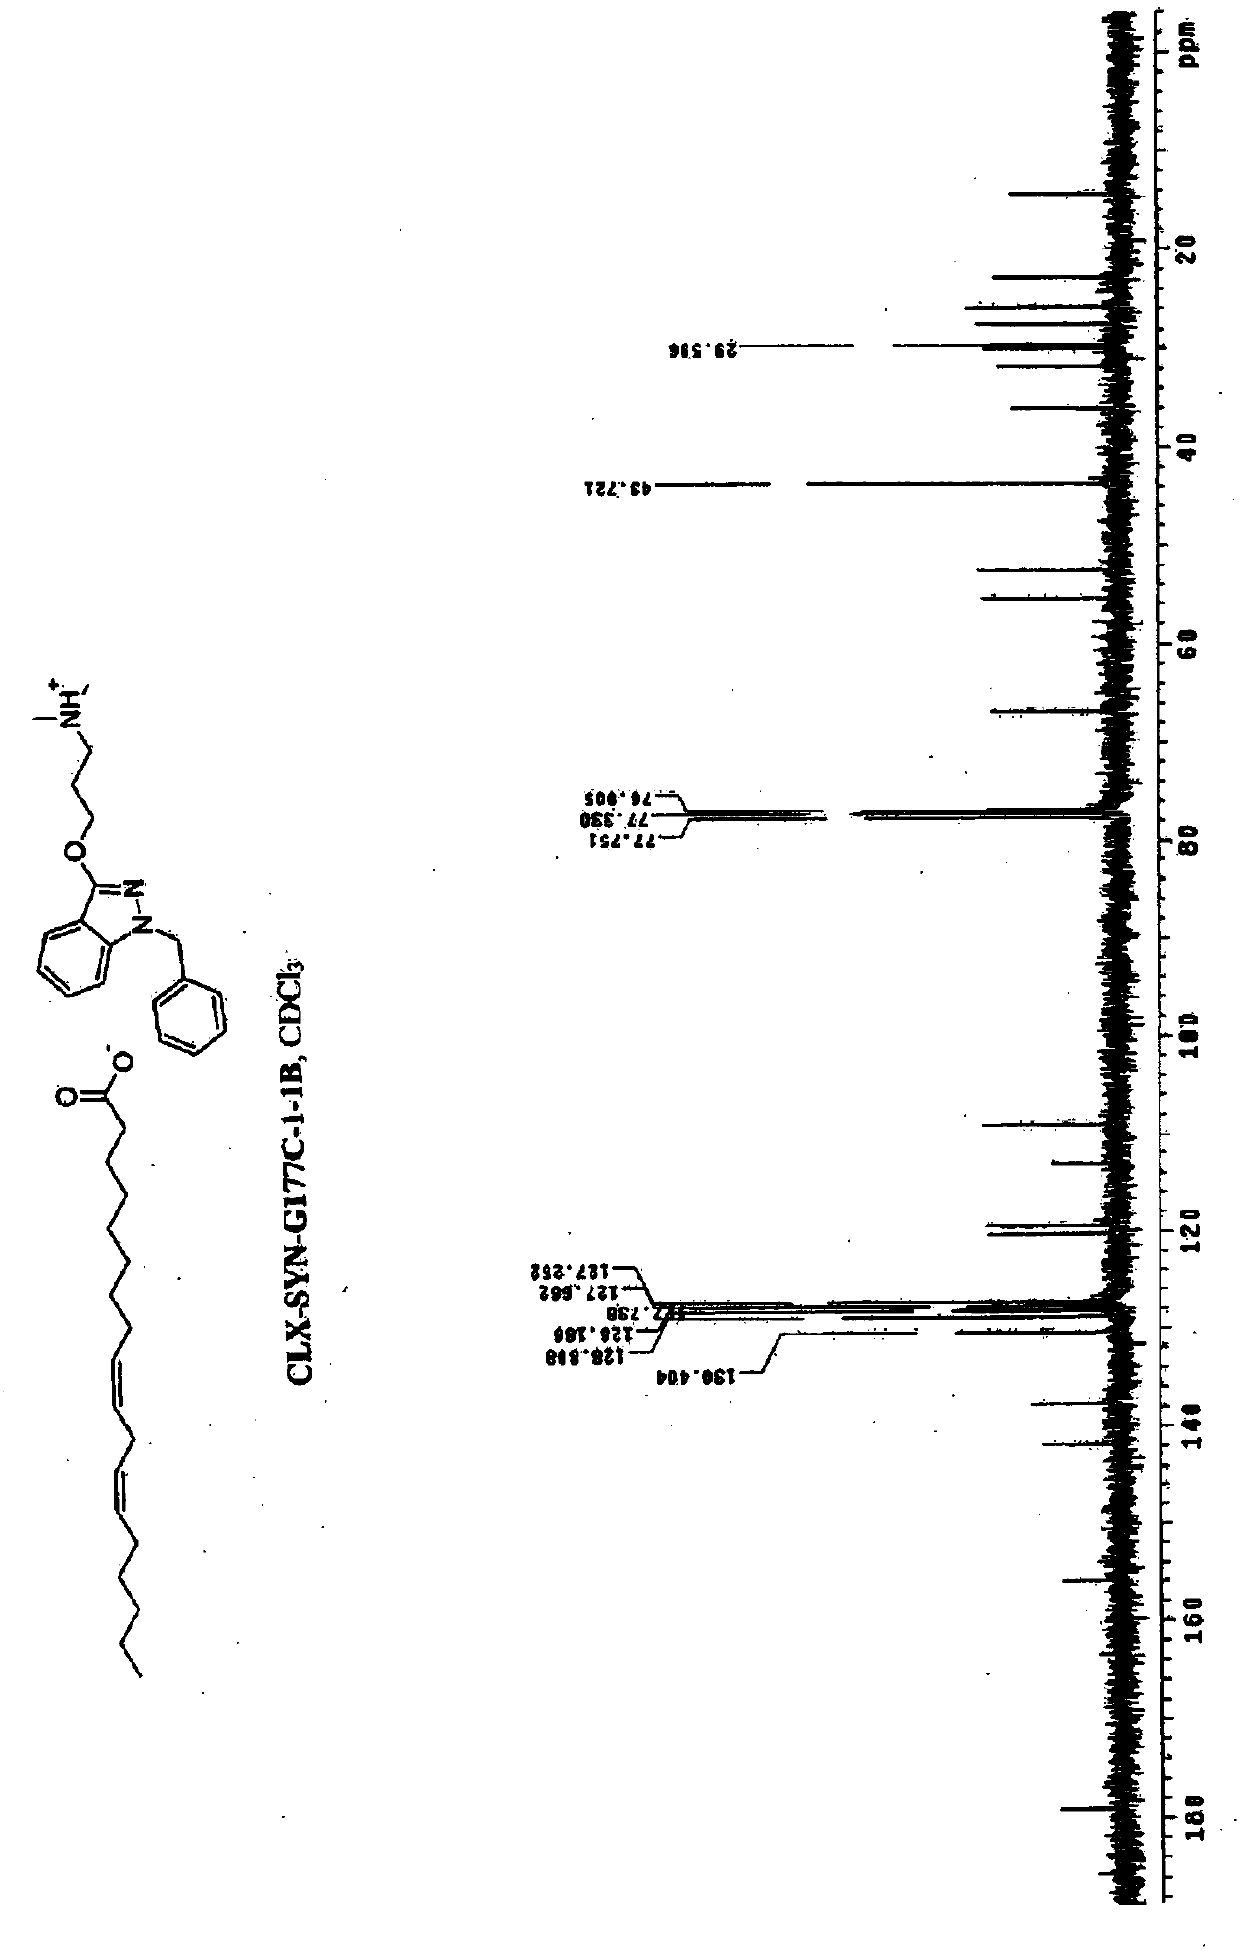 Compositions and methods for the treatment of mucositis